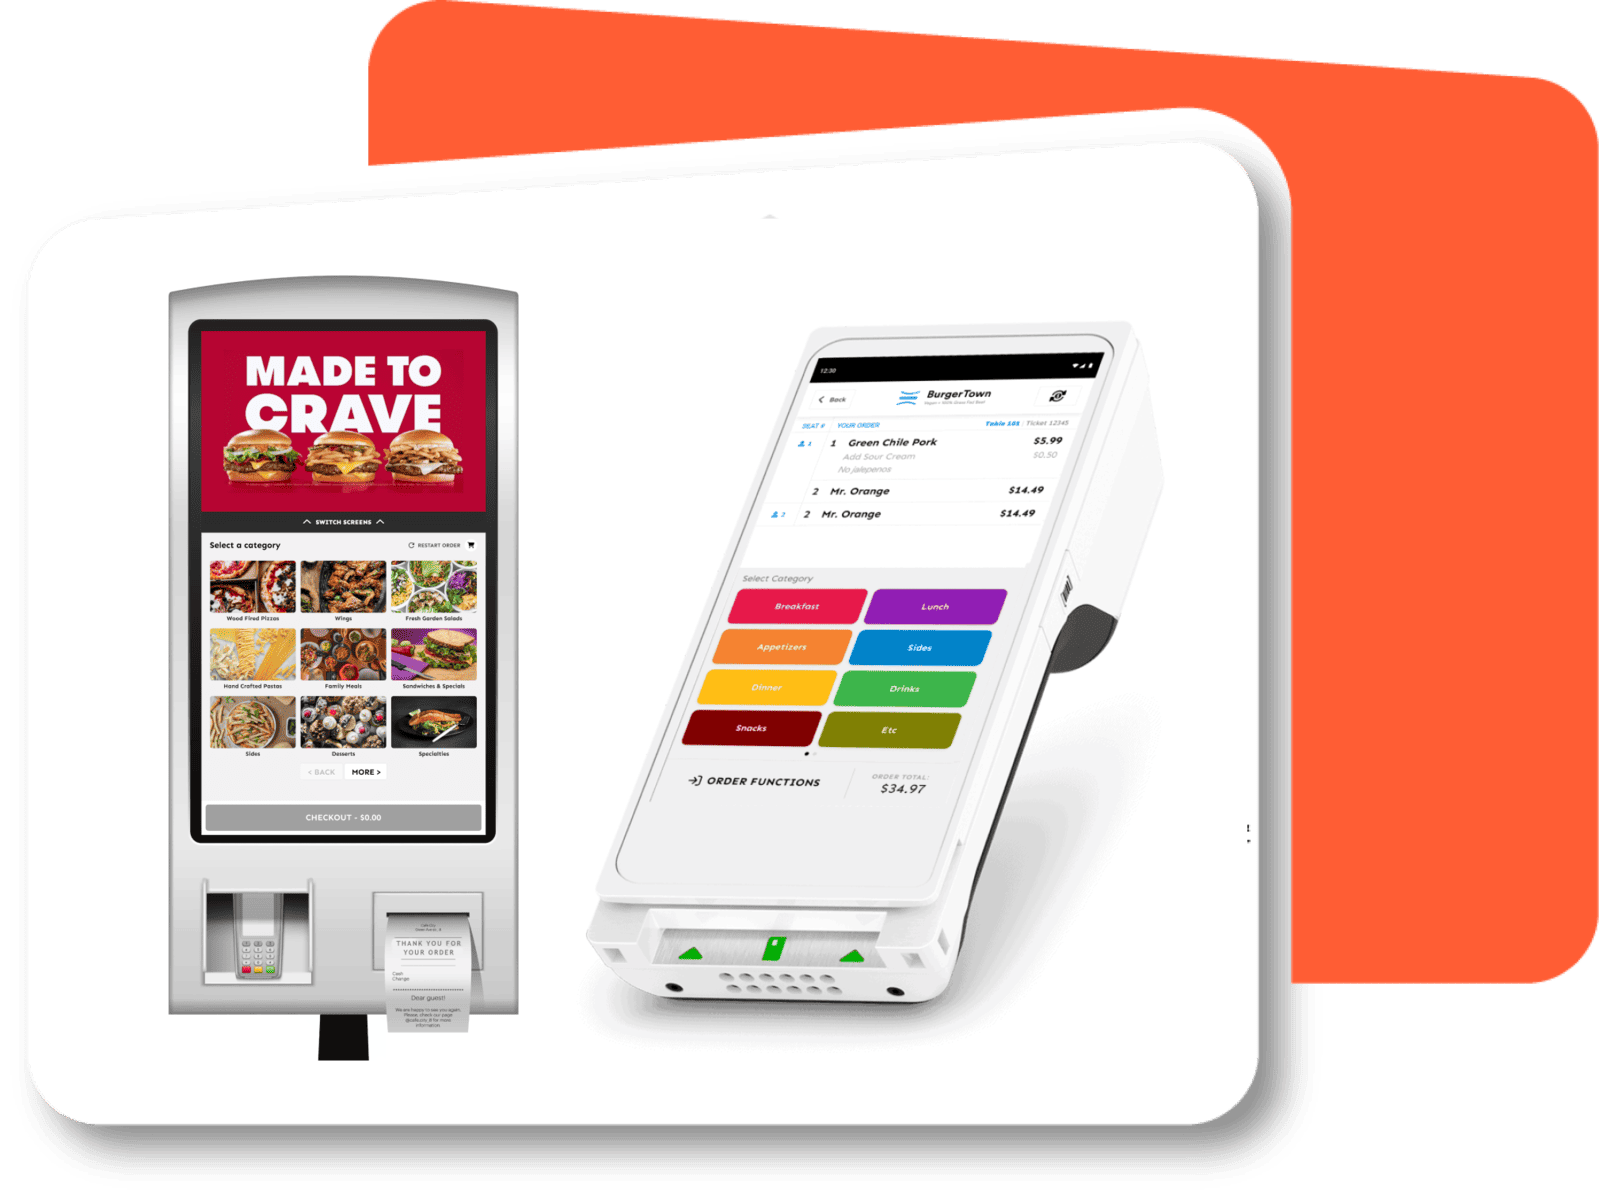 CardFree quick service restaurant on-site kiosks and mobile POS EMV